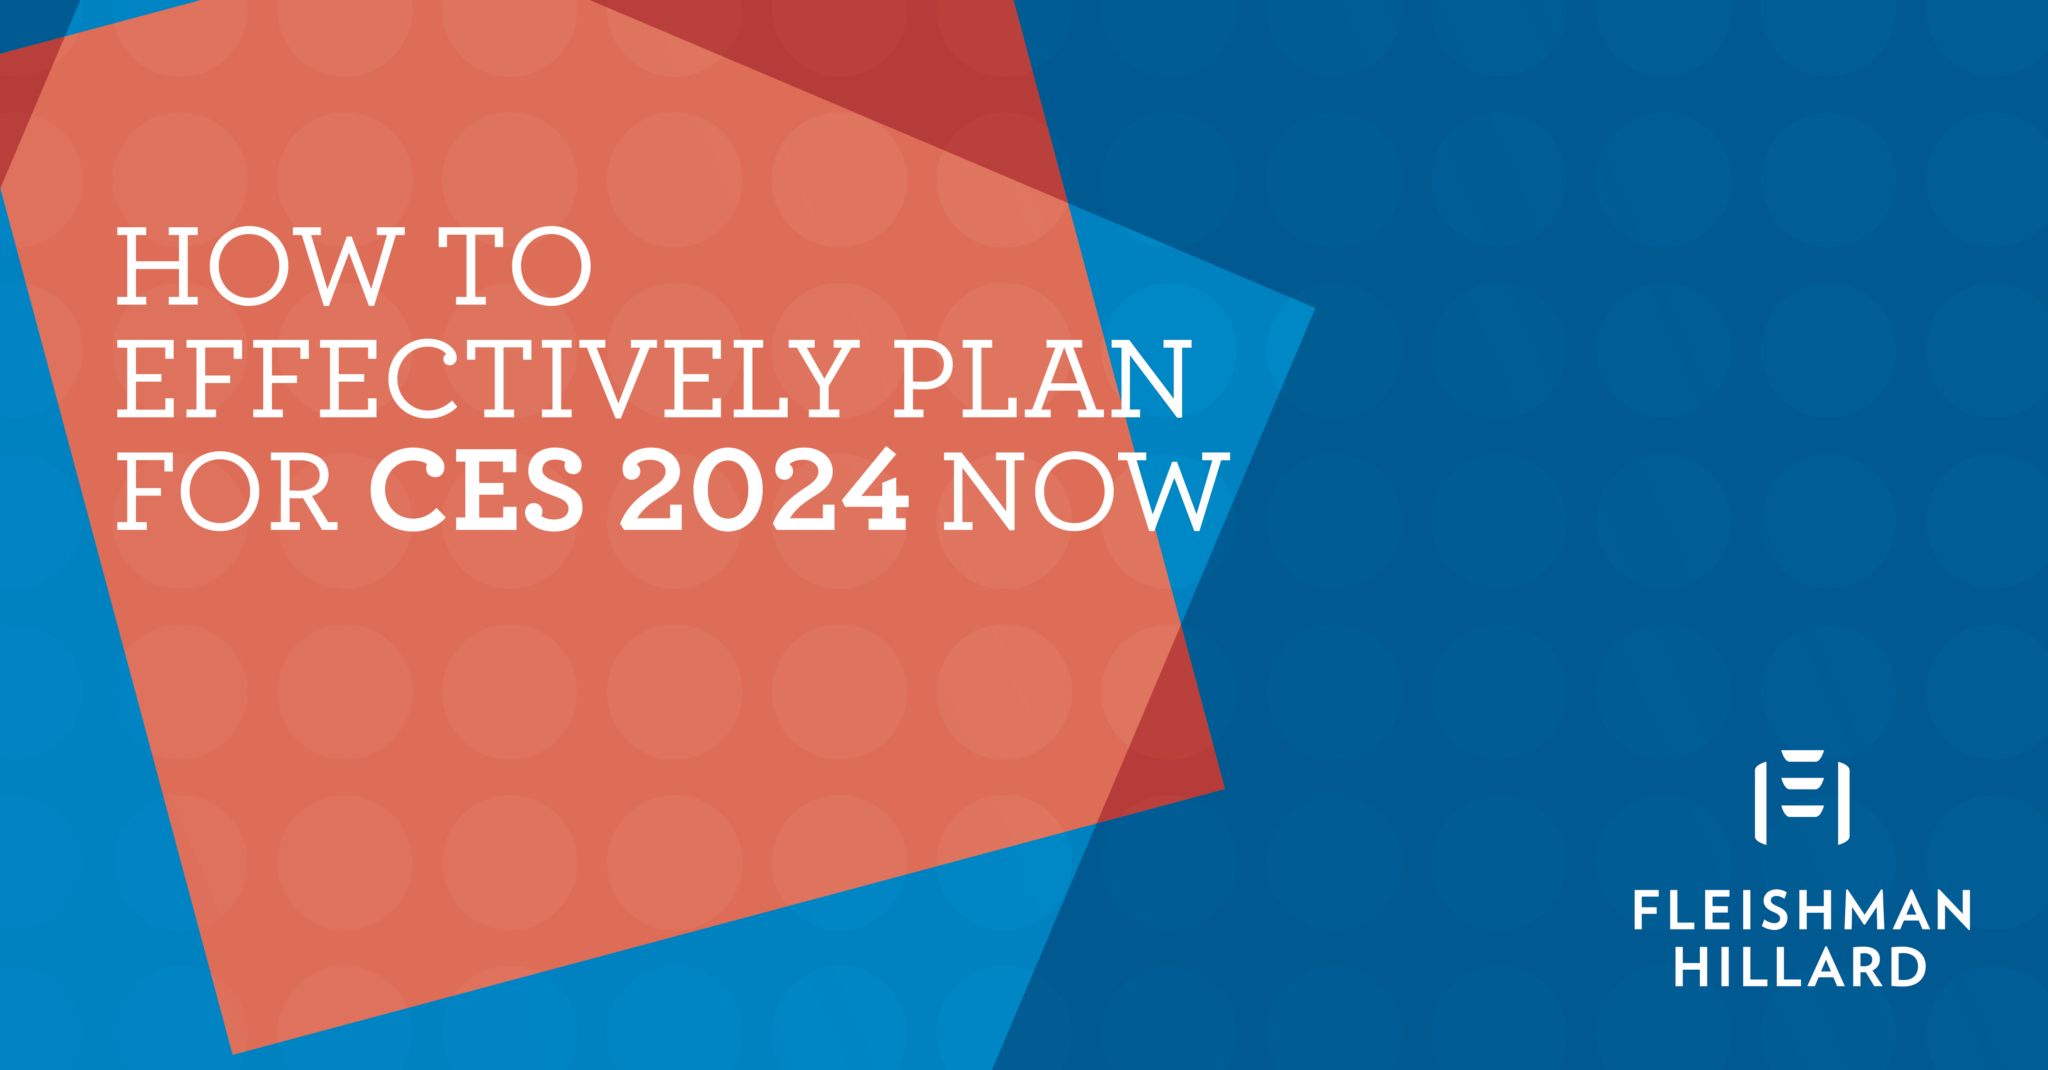 How To Effectively Plan for CES 2024 Now FleishmanHillard